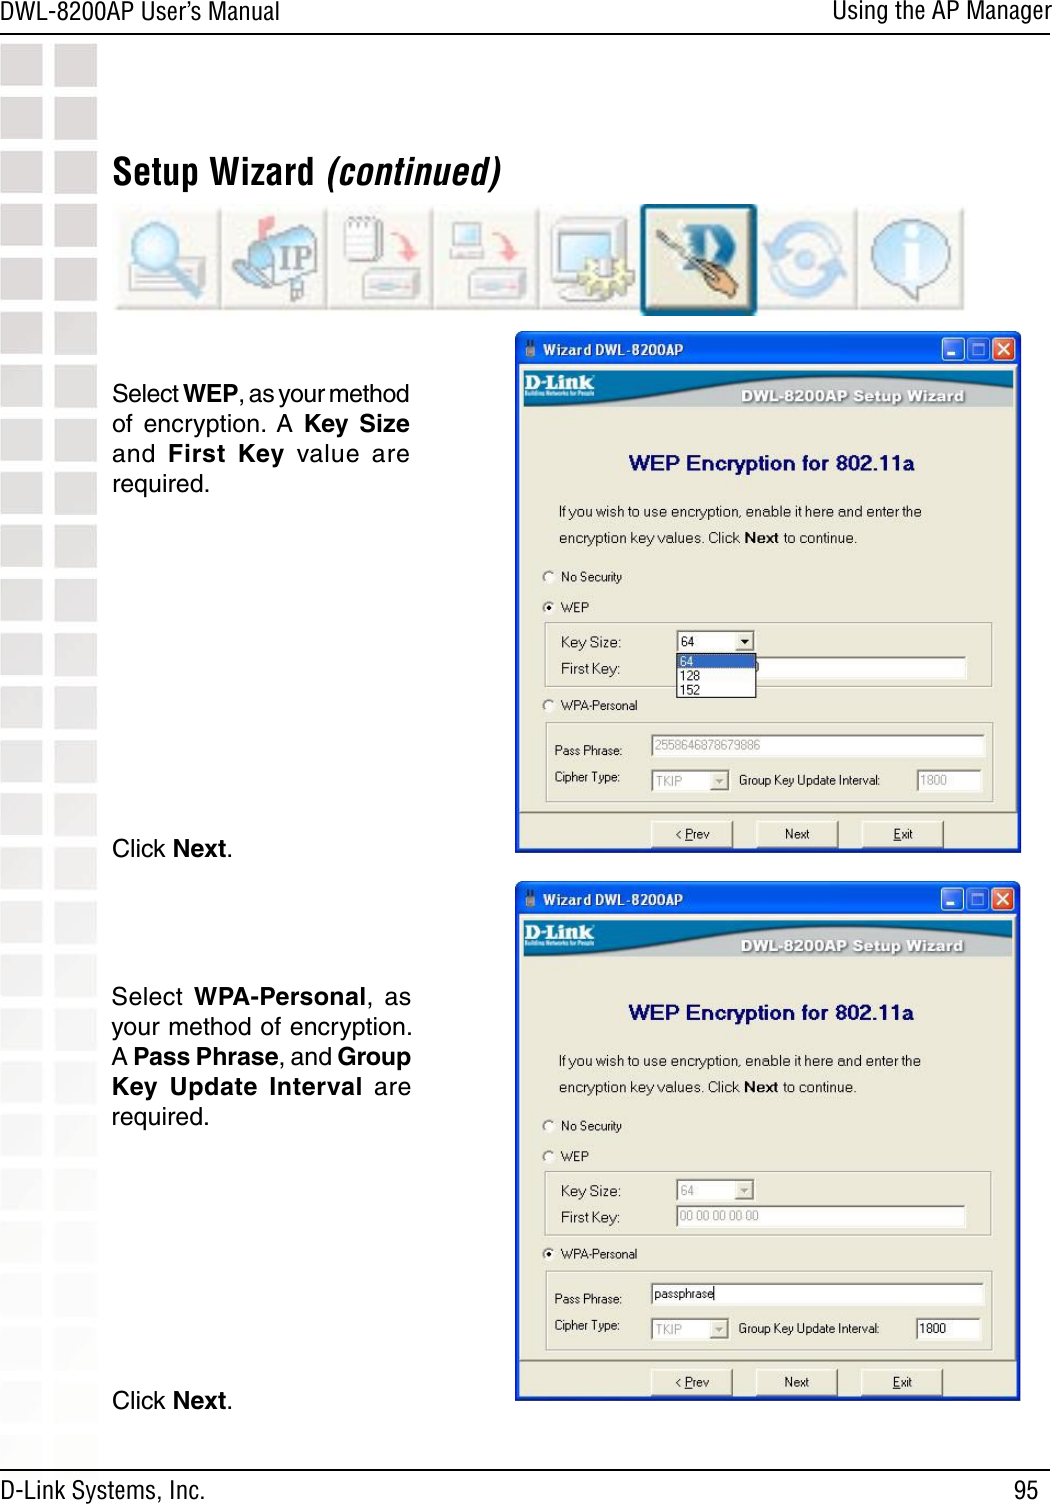 95DWL-8200AP User’s ManualD-Link Systems, Inc.Using the AP ManagerSetup Wizard (continued)Click Next.Select  WPA-Personal,  as your method of encryption. A Pass Phrase, and Group Key  Update  Interval are required.Click Next.Select WEP, as your method of  encryption.  A  Key  Size and  First  Key  value  are required.